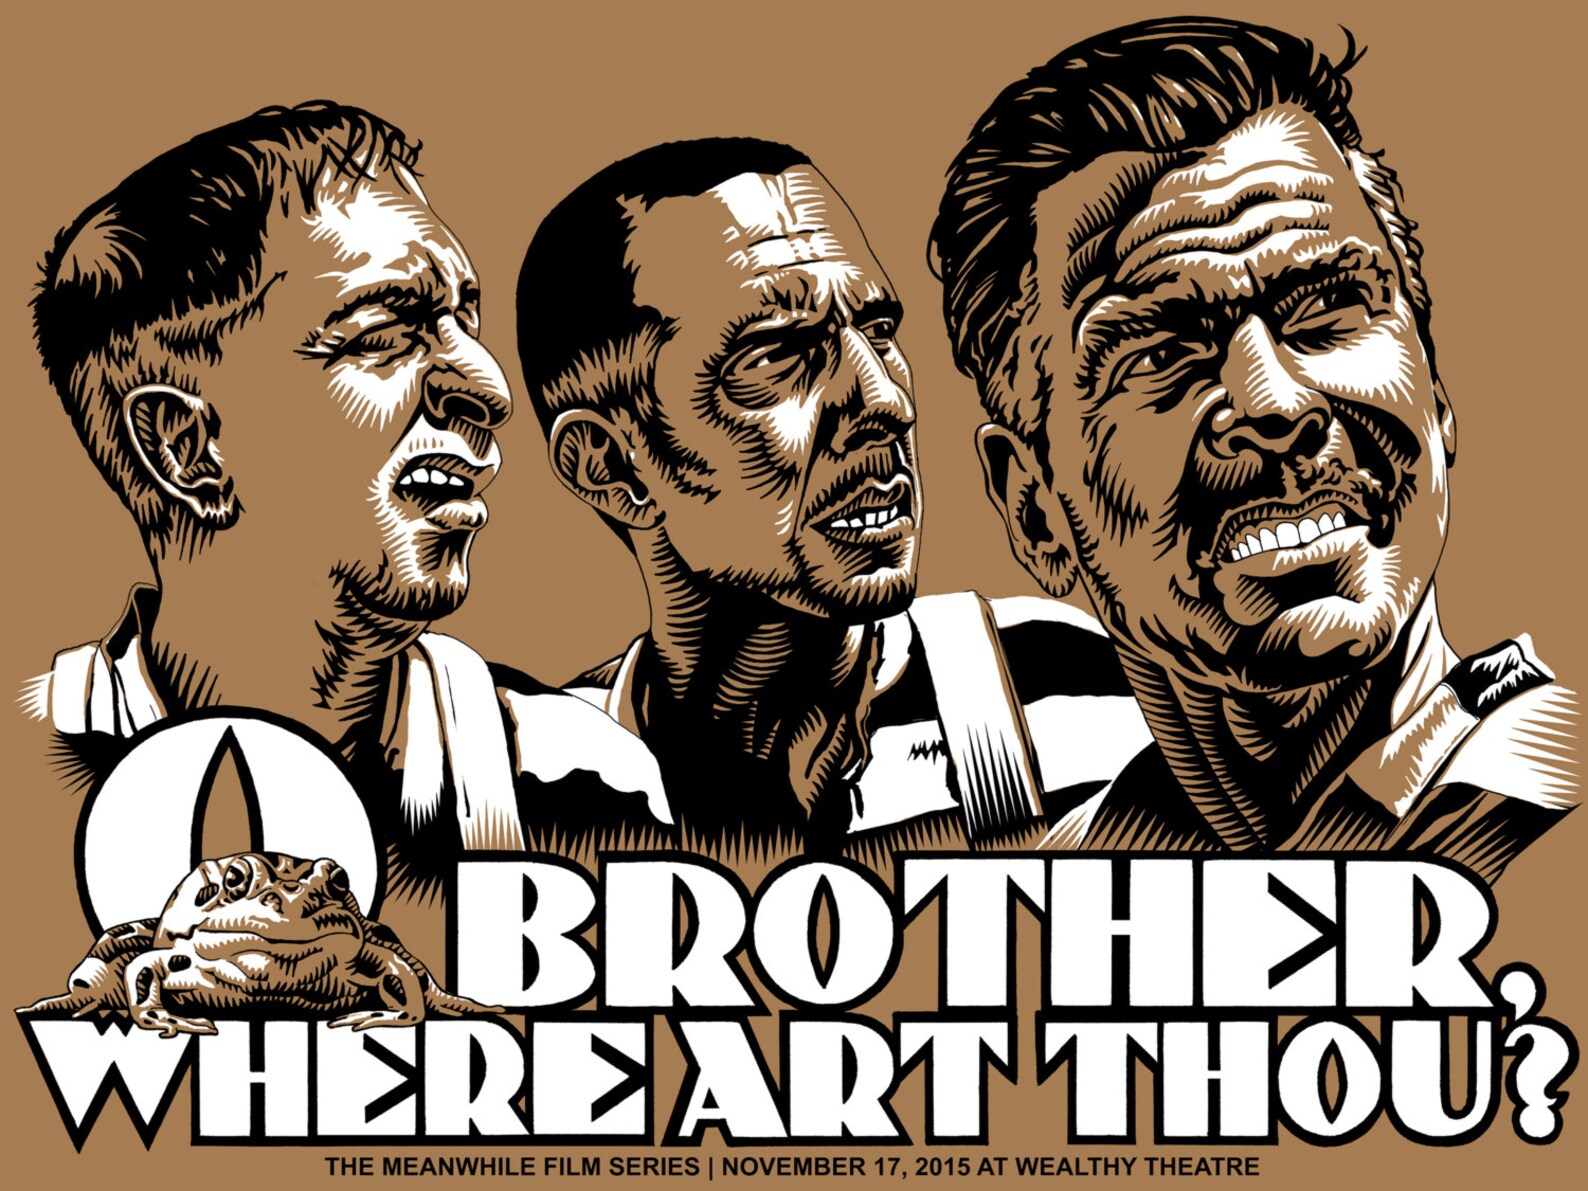 Movie the Podcast O’ Brother where art thou ?